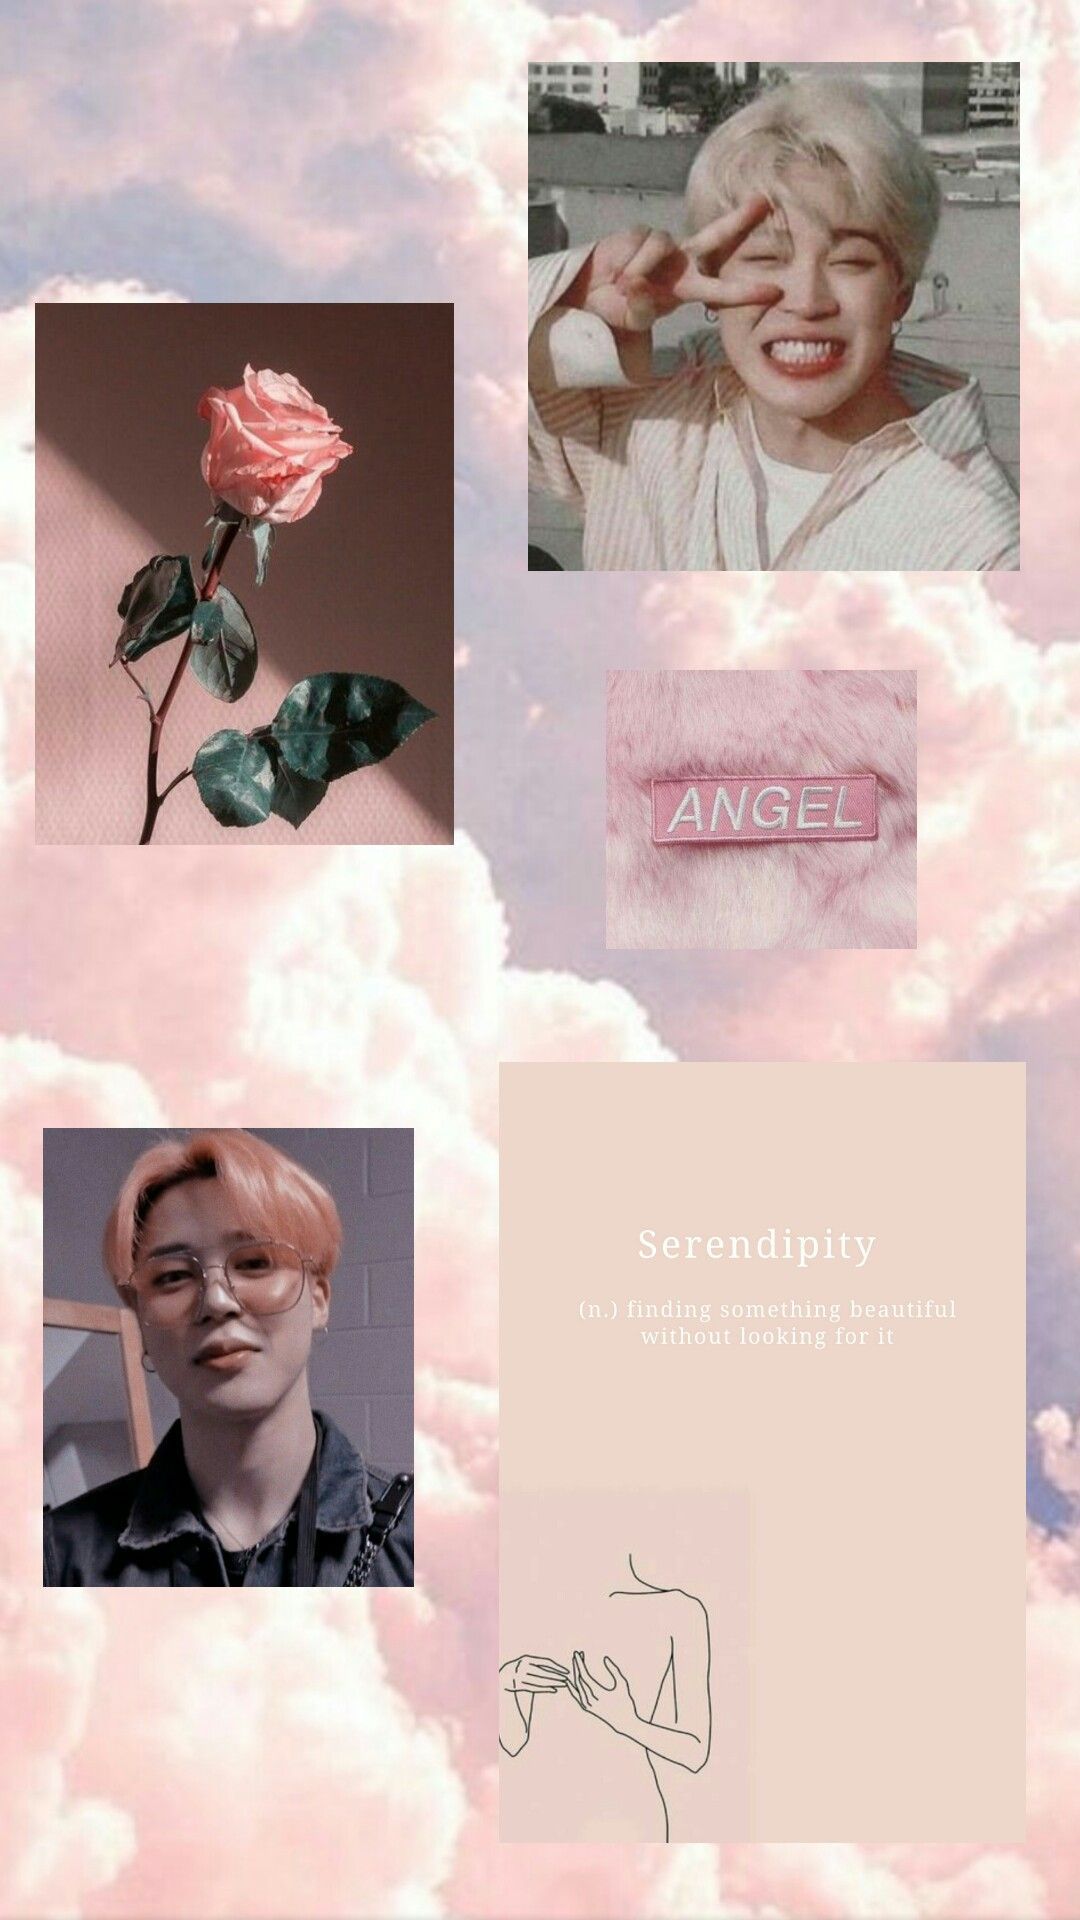 Aesthetic pink collage with clouds, a rose, and pictures of Jimin from BTS - Jimin